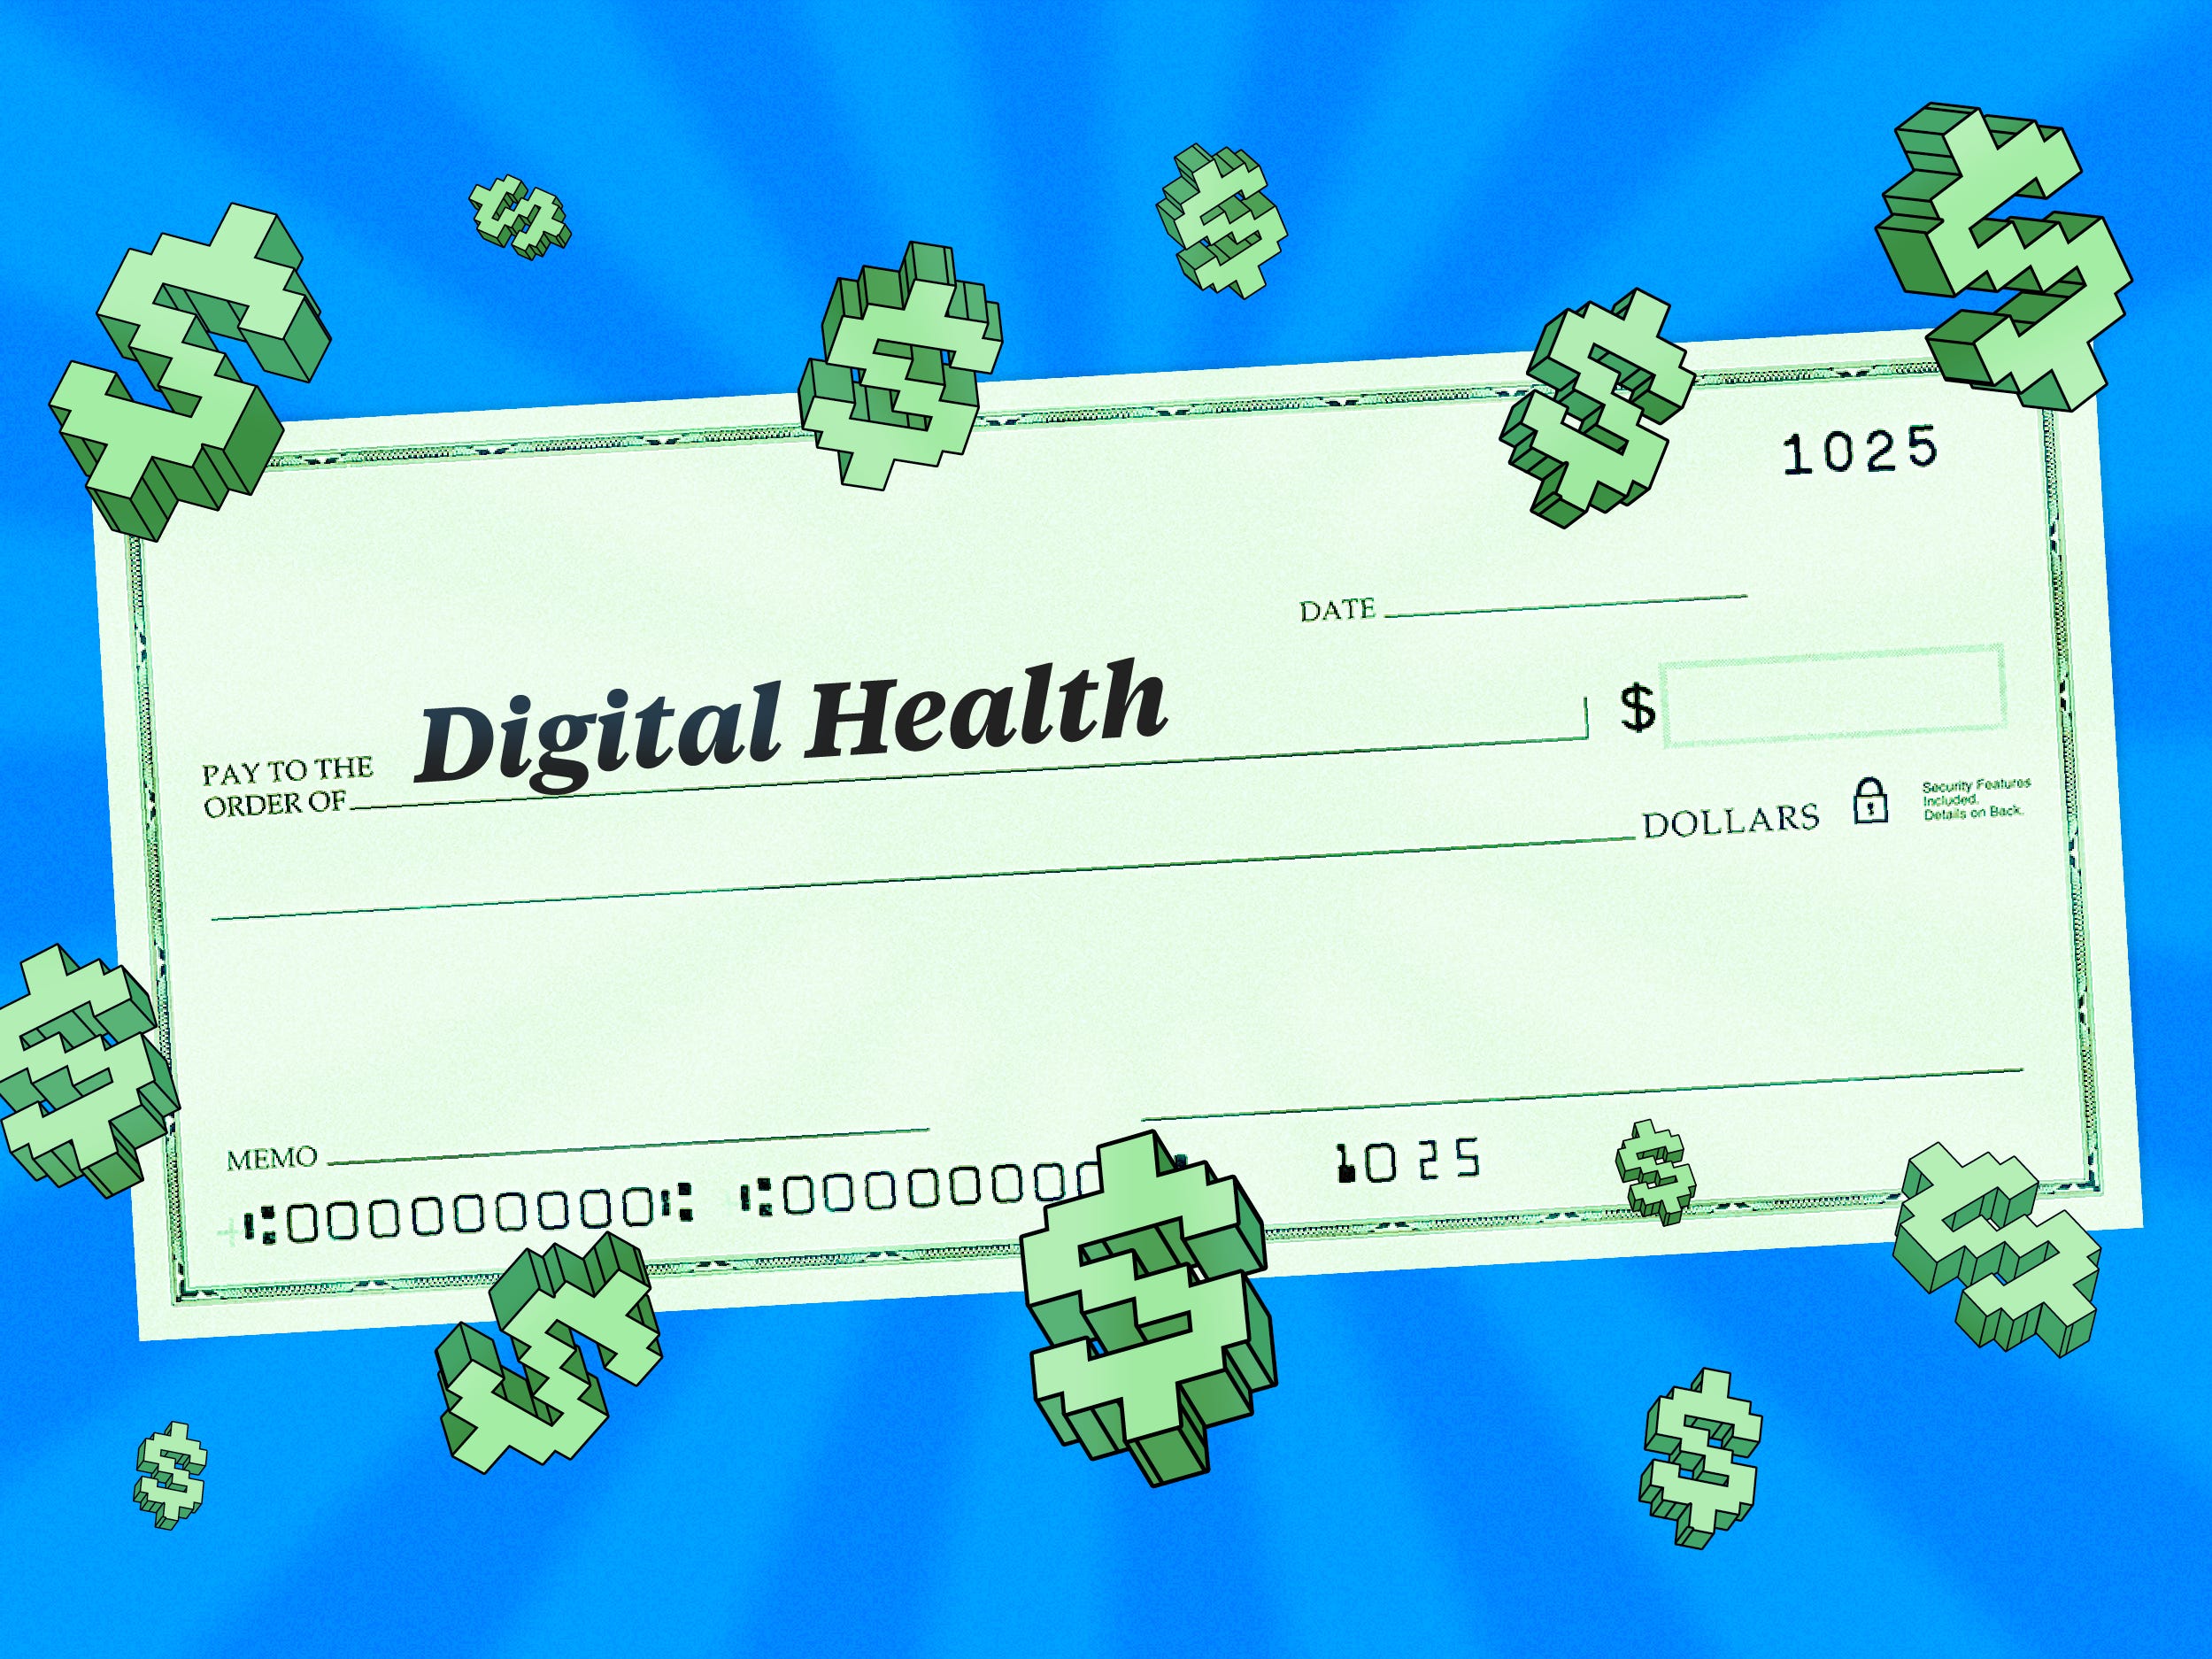 A check with the words "paid to the order of digital health" written on it surrounded by dollar signs on a blue background.